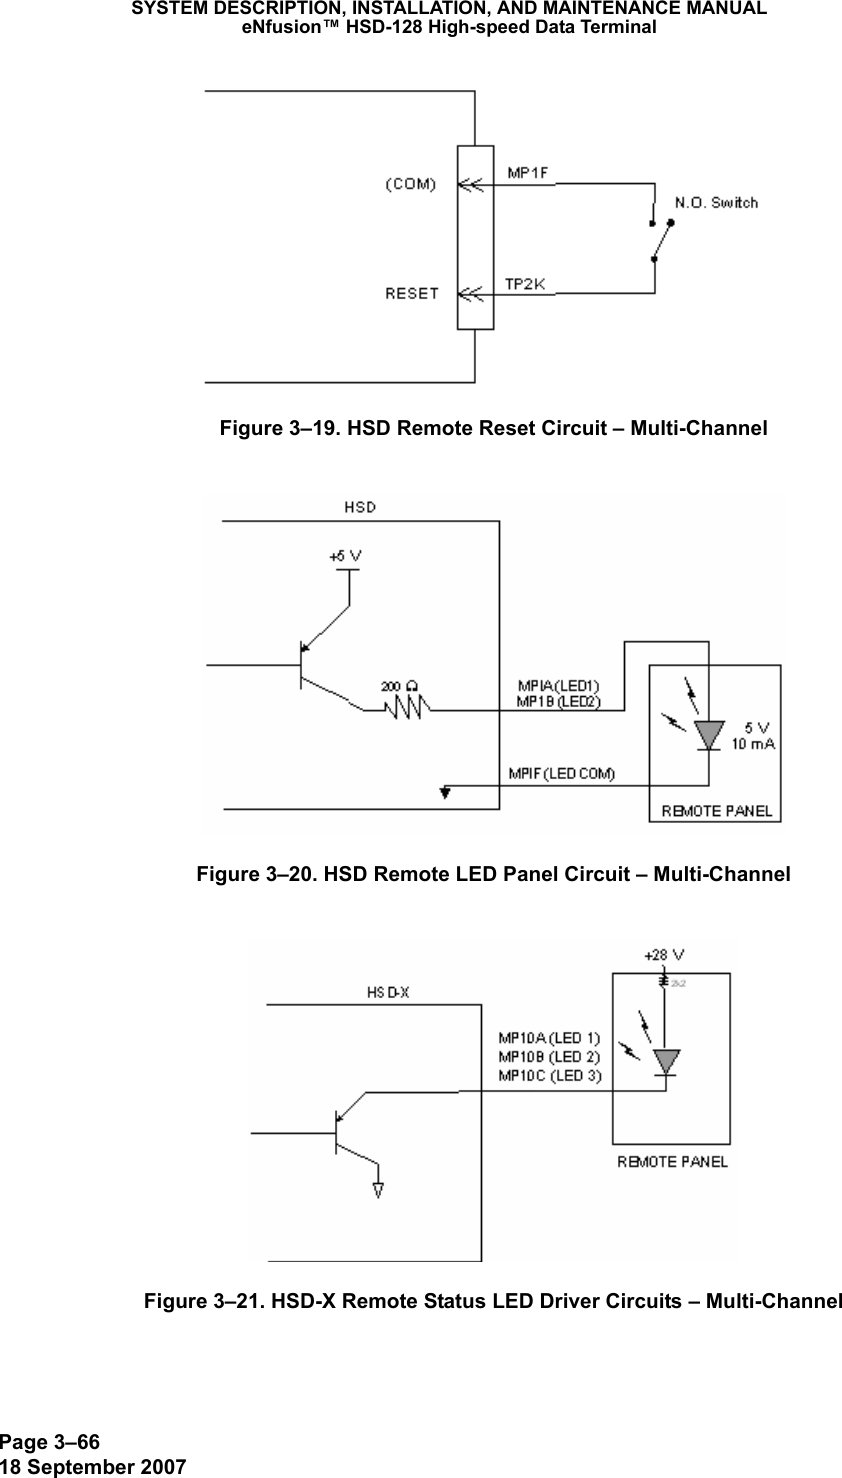 Page 3–6618 September 2007SYSTEM DESCRIPTION, INSTALLATION, AND MAINTENANCE MANUALeNfusion™ HSD-128 High-speed Data TerminalFigure 3–19. HSD Remote Reset Circuit – Multi-ChannelFigure 3–20. HSD Remote LED Panel Circuit – Multi-ChannelFigure 3–21. HSD-X Remote Status LED Driver Circuits – Multi-Channel